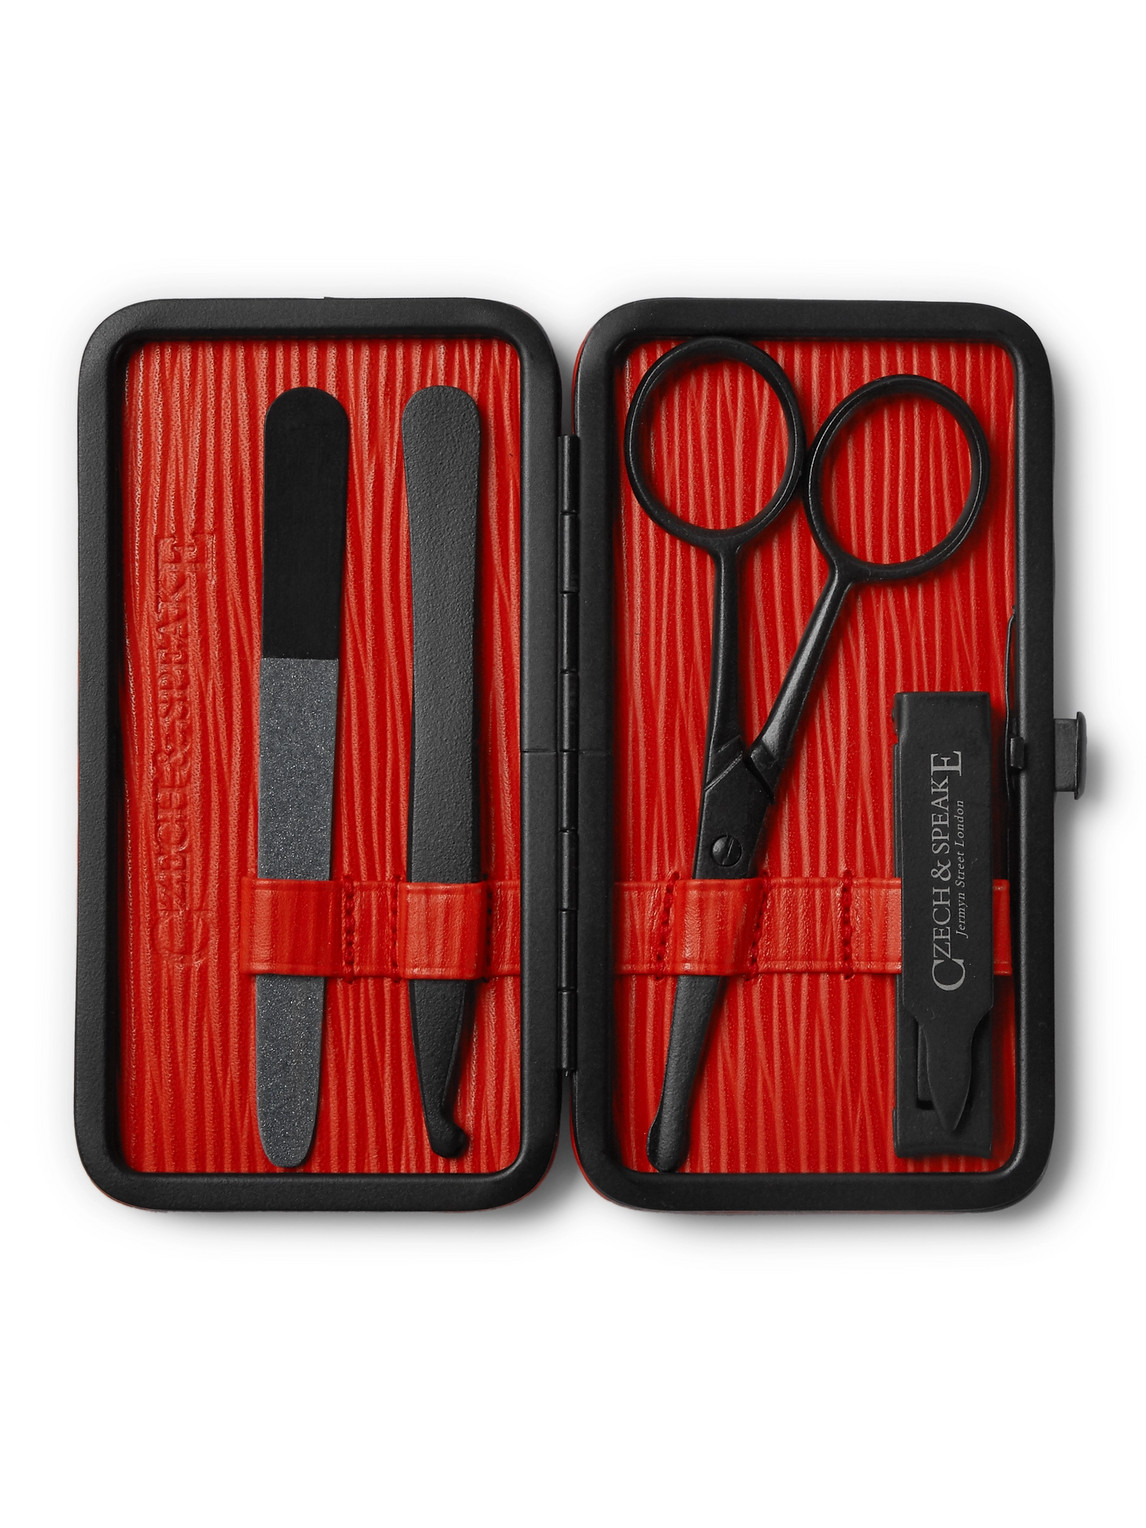 Czech & Speake Leather-bound Manicure Set In Colorless